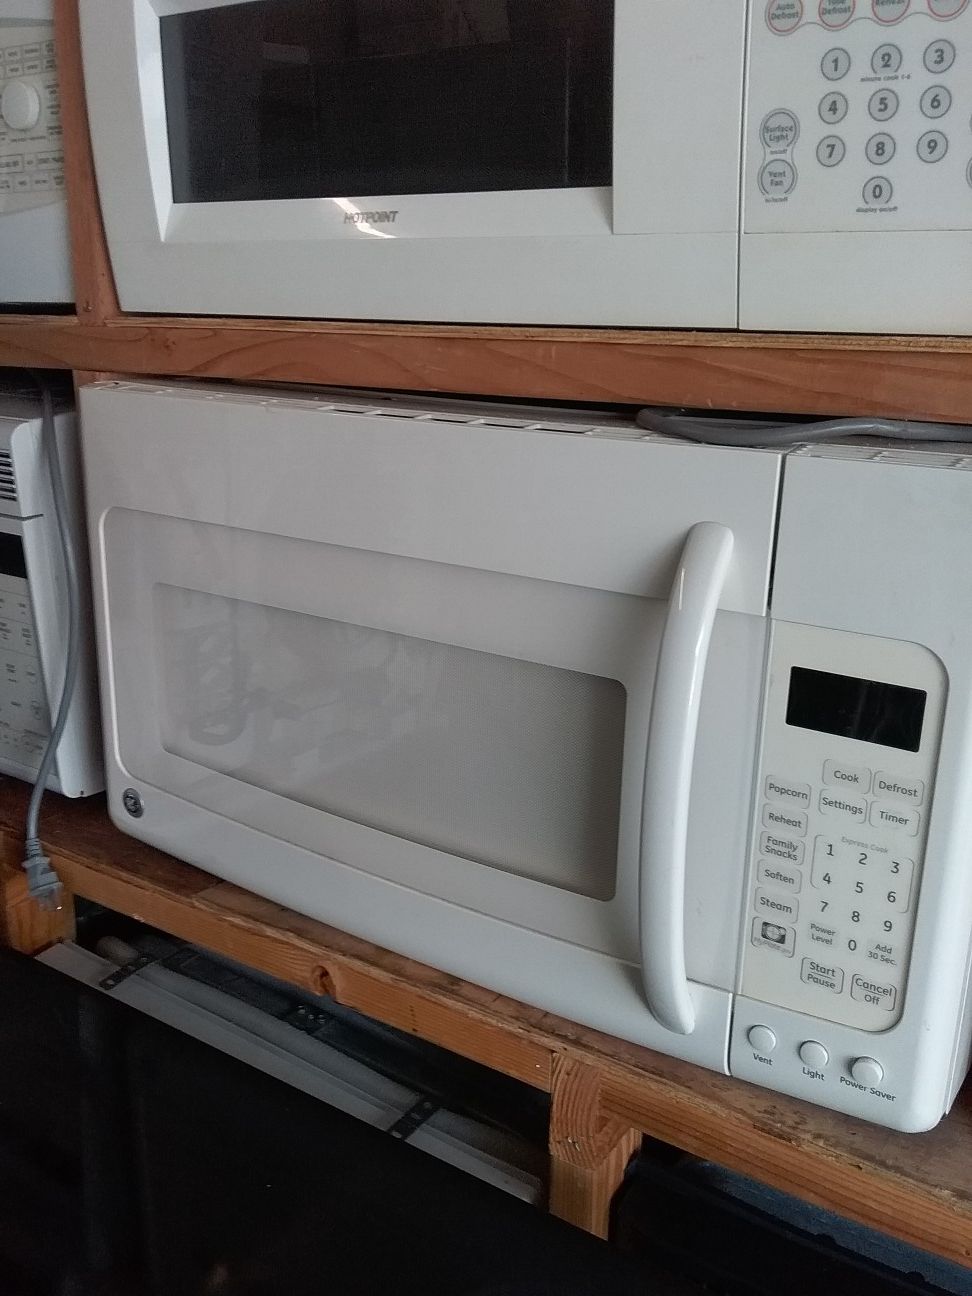 Off white ge over the range microwave bracket and screws included in excellent working condition